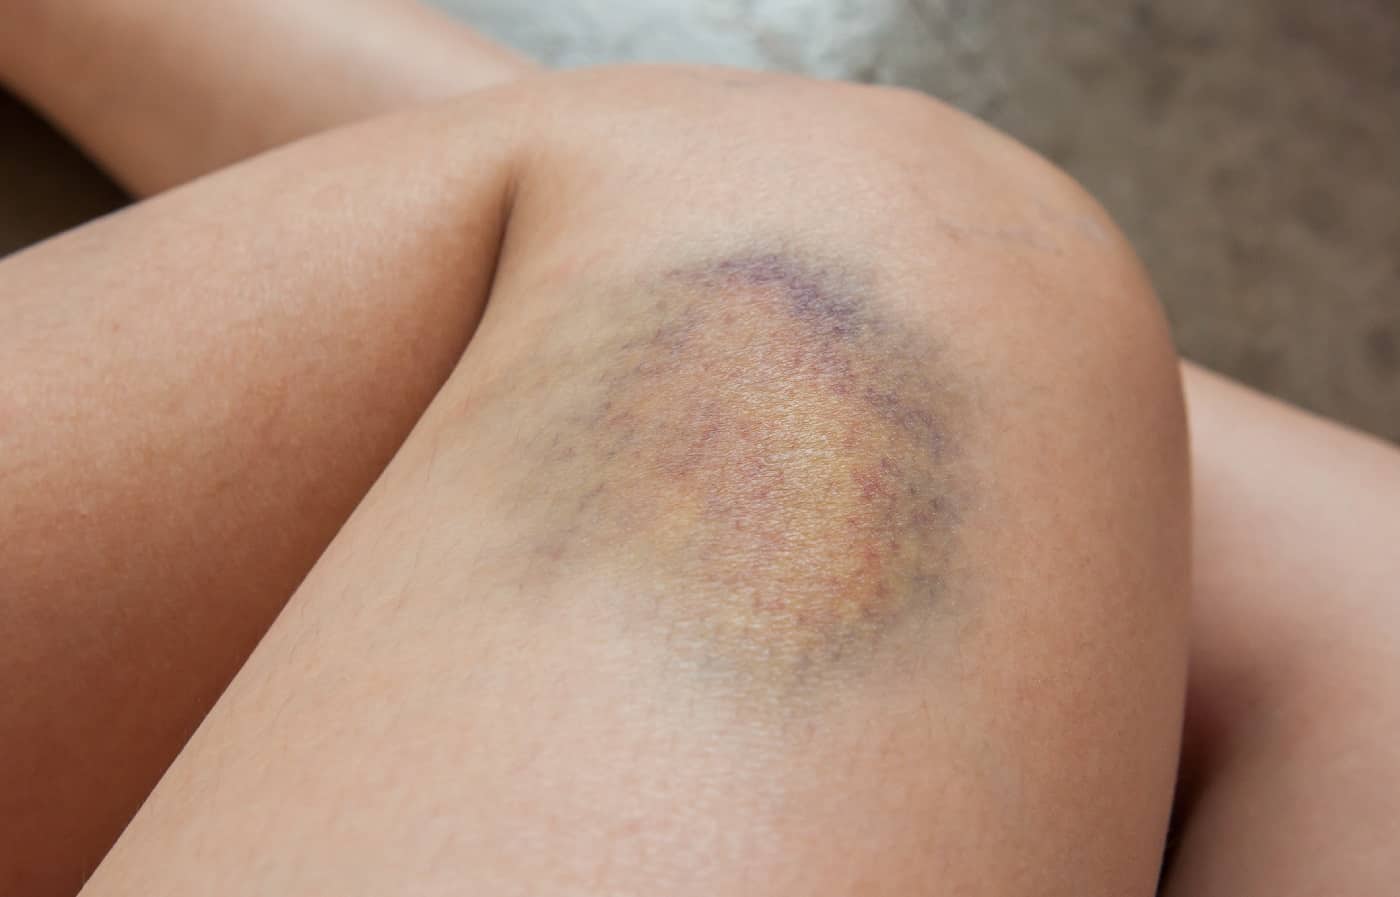 Knee with bruise